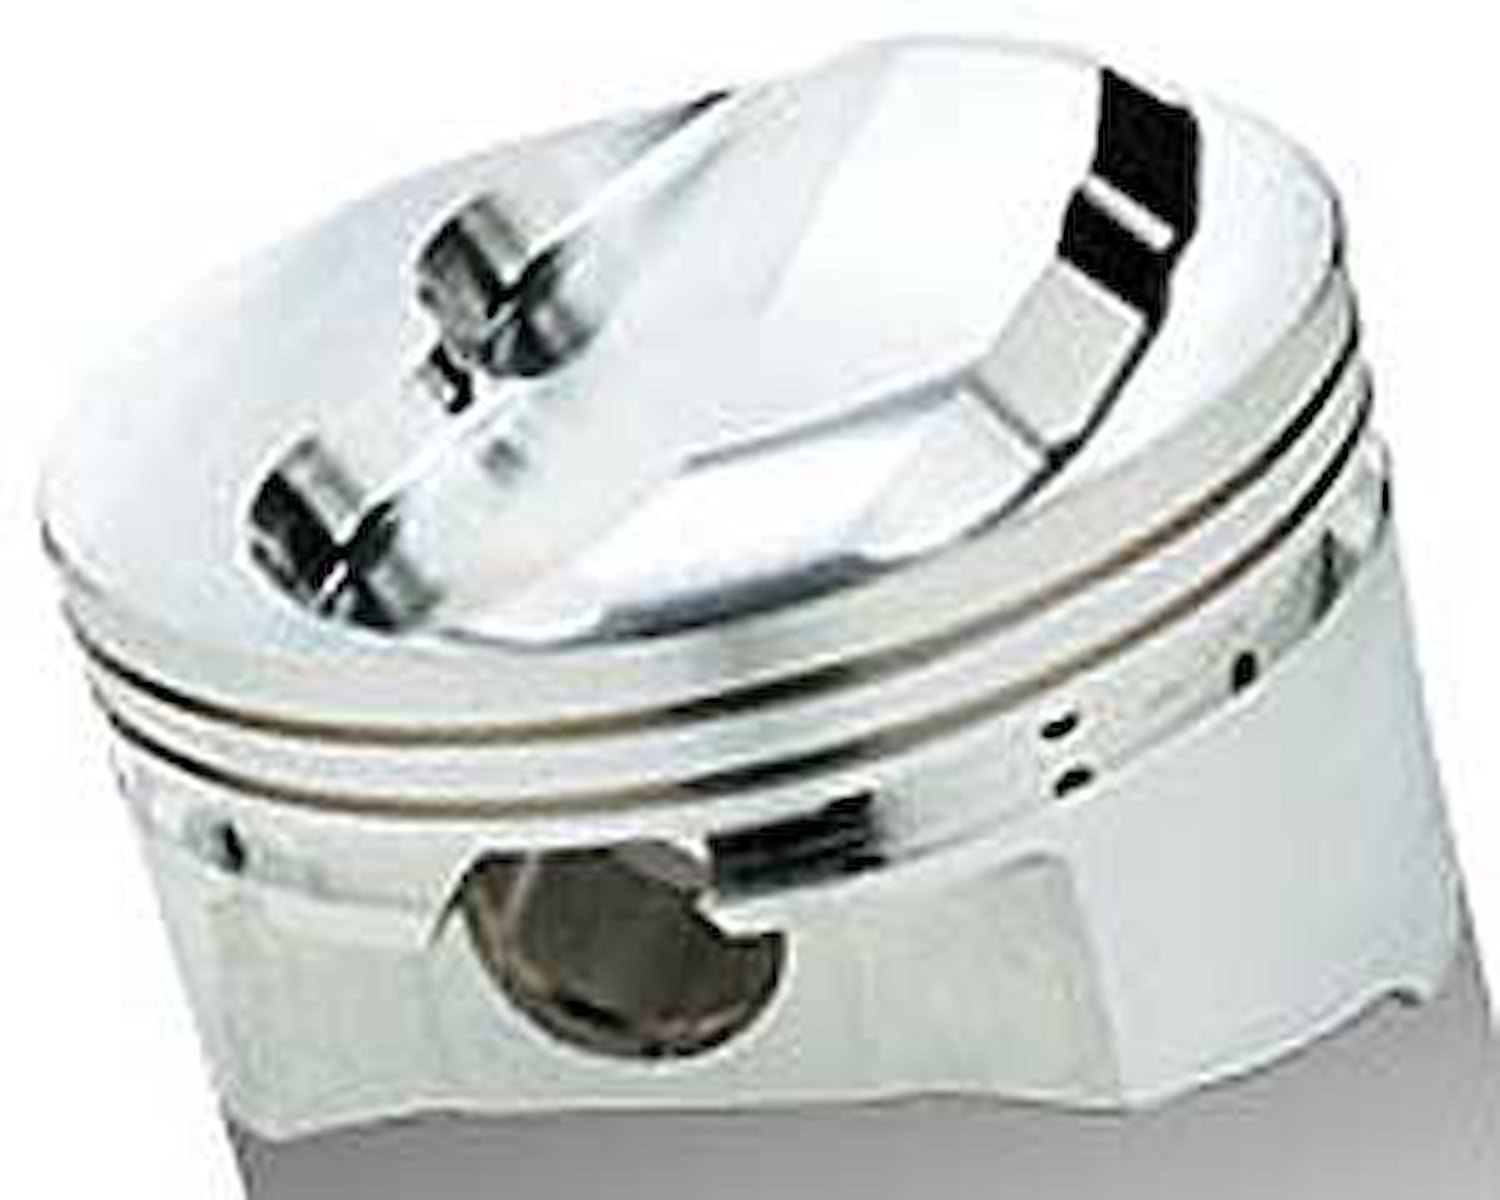 SRP Dome Pistons for Small Block Chevy Bore 4.030"